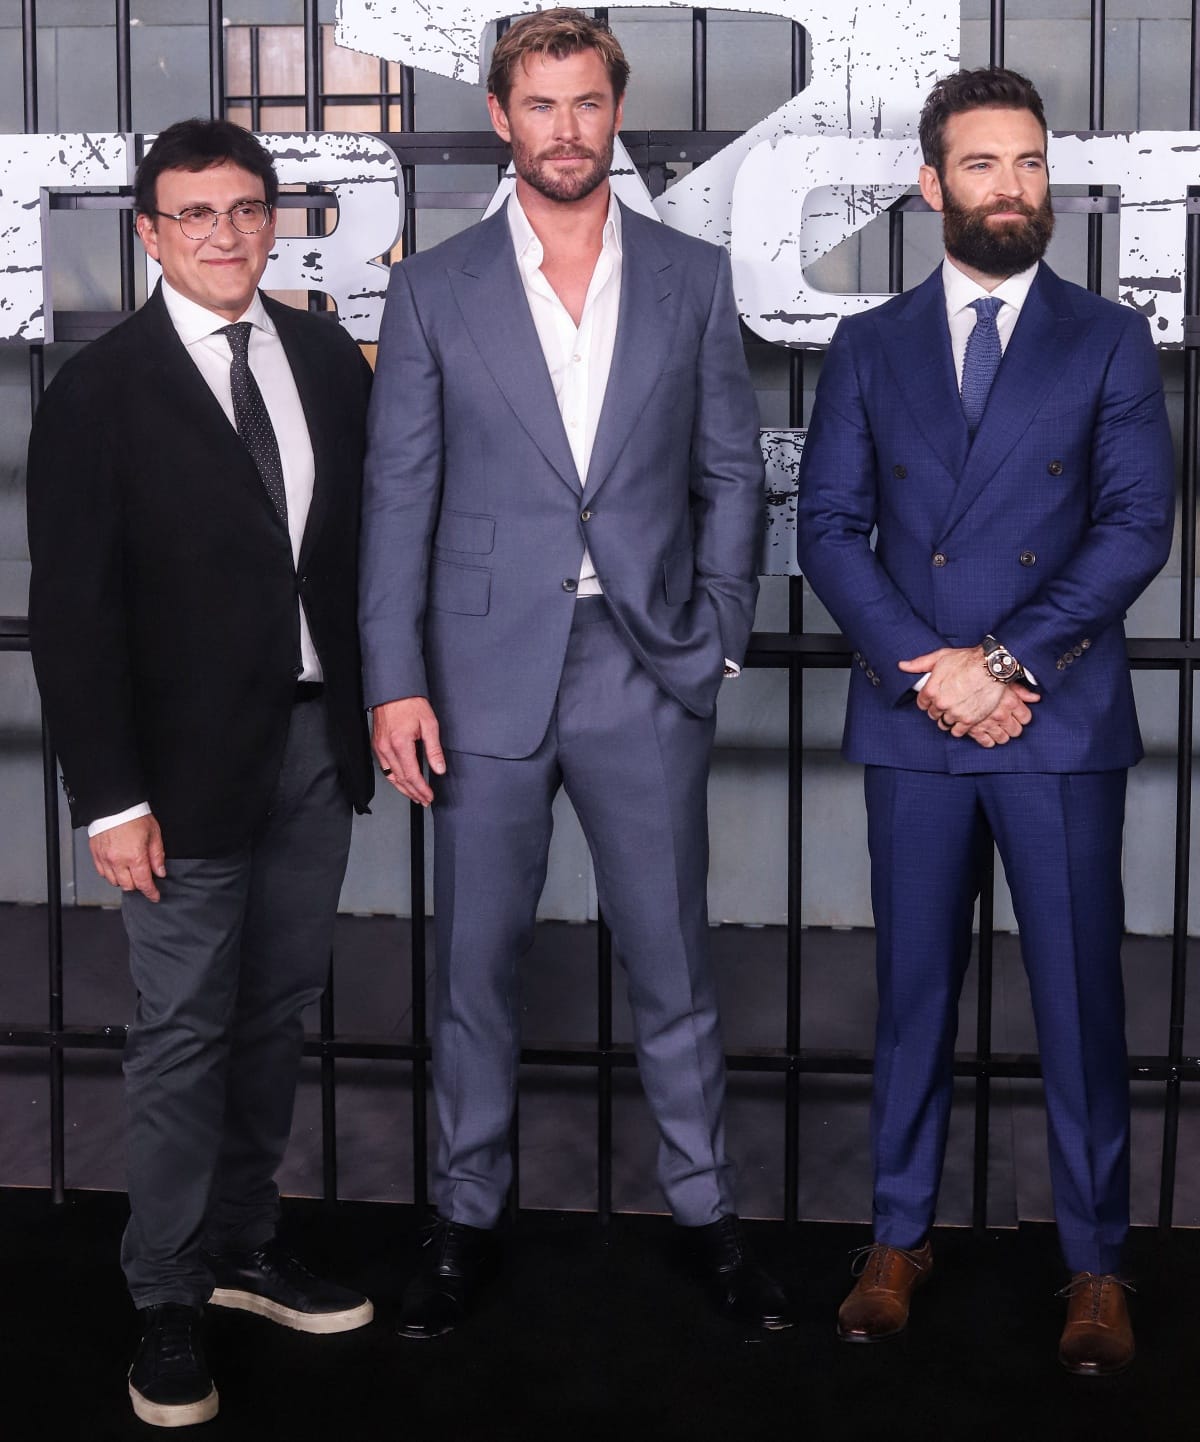 Producer Anthony Russo, Chris Hemsworth, and director Sam Hargrave looking dapper in their suits